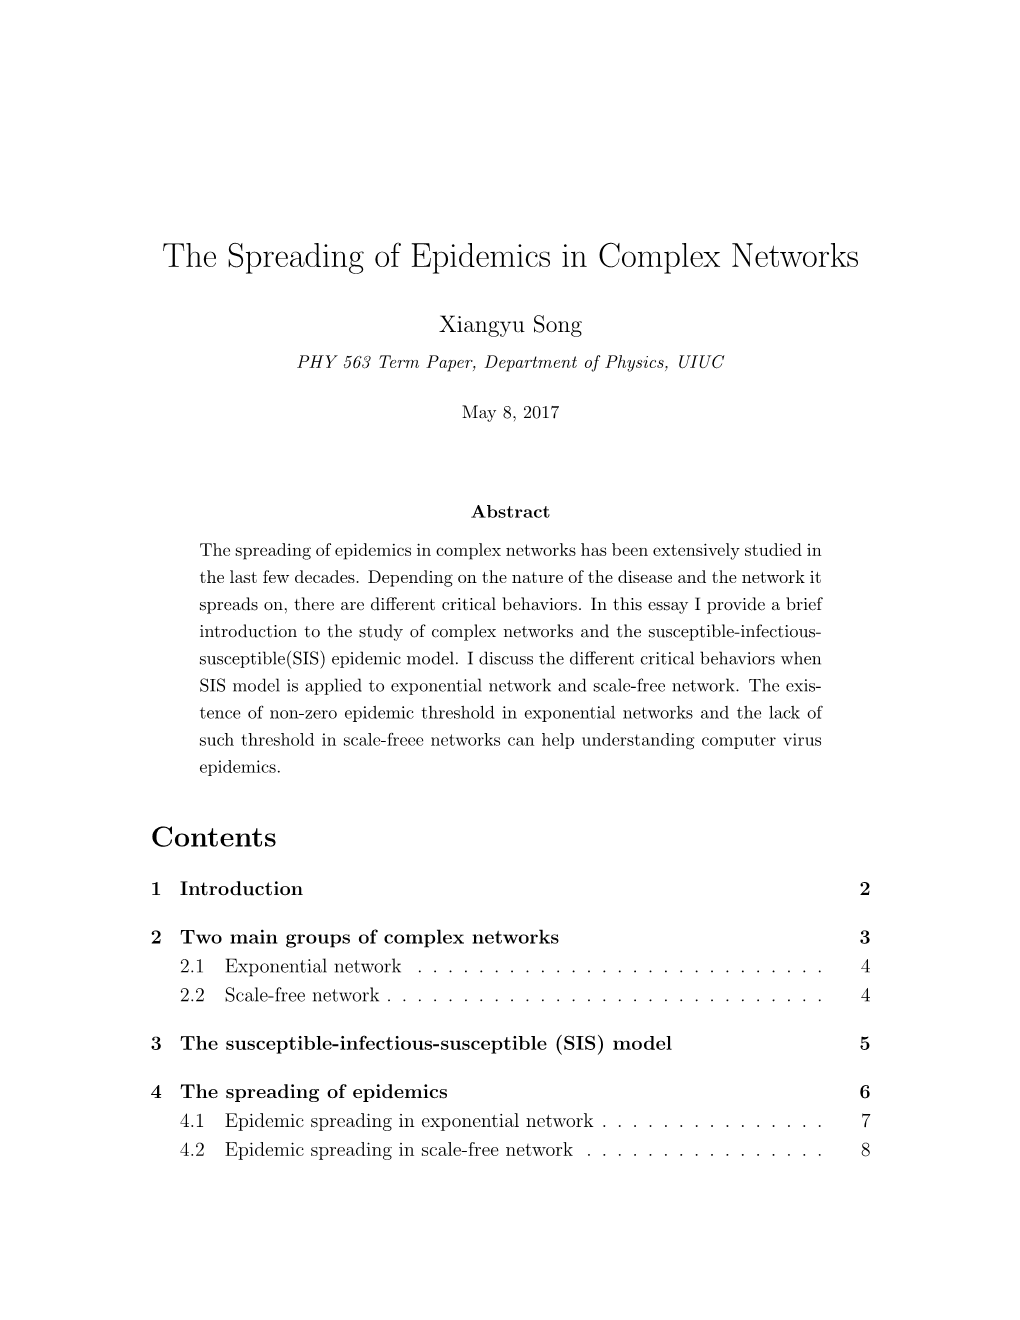 The Spreading of Epidemics in Complex Networks